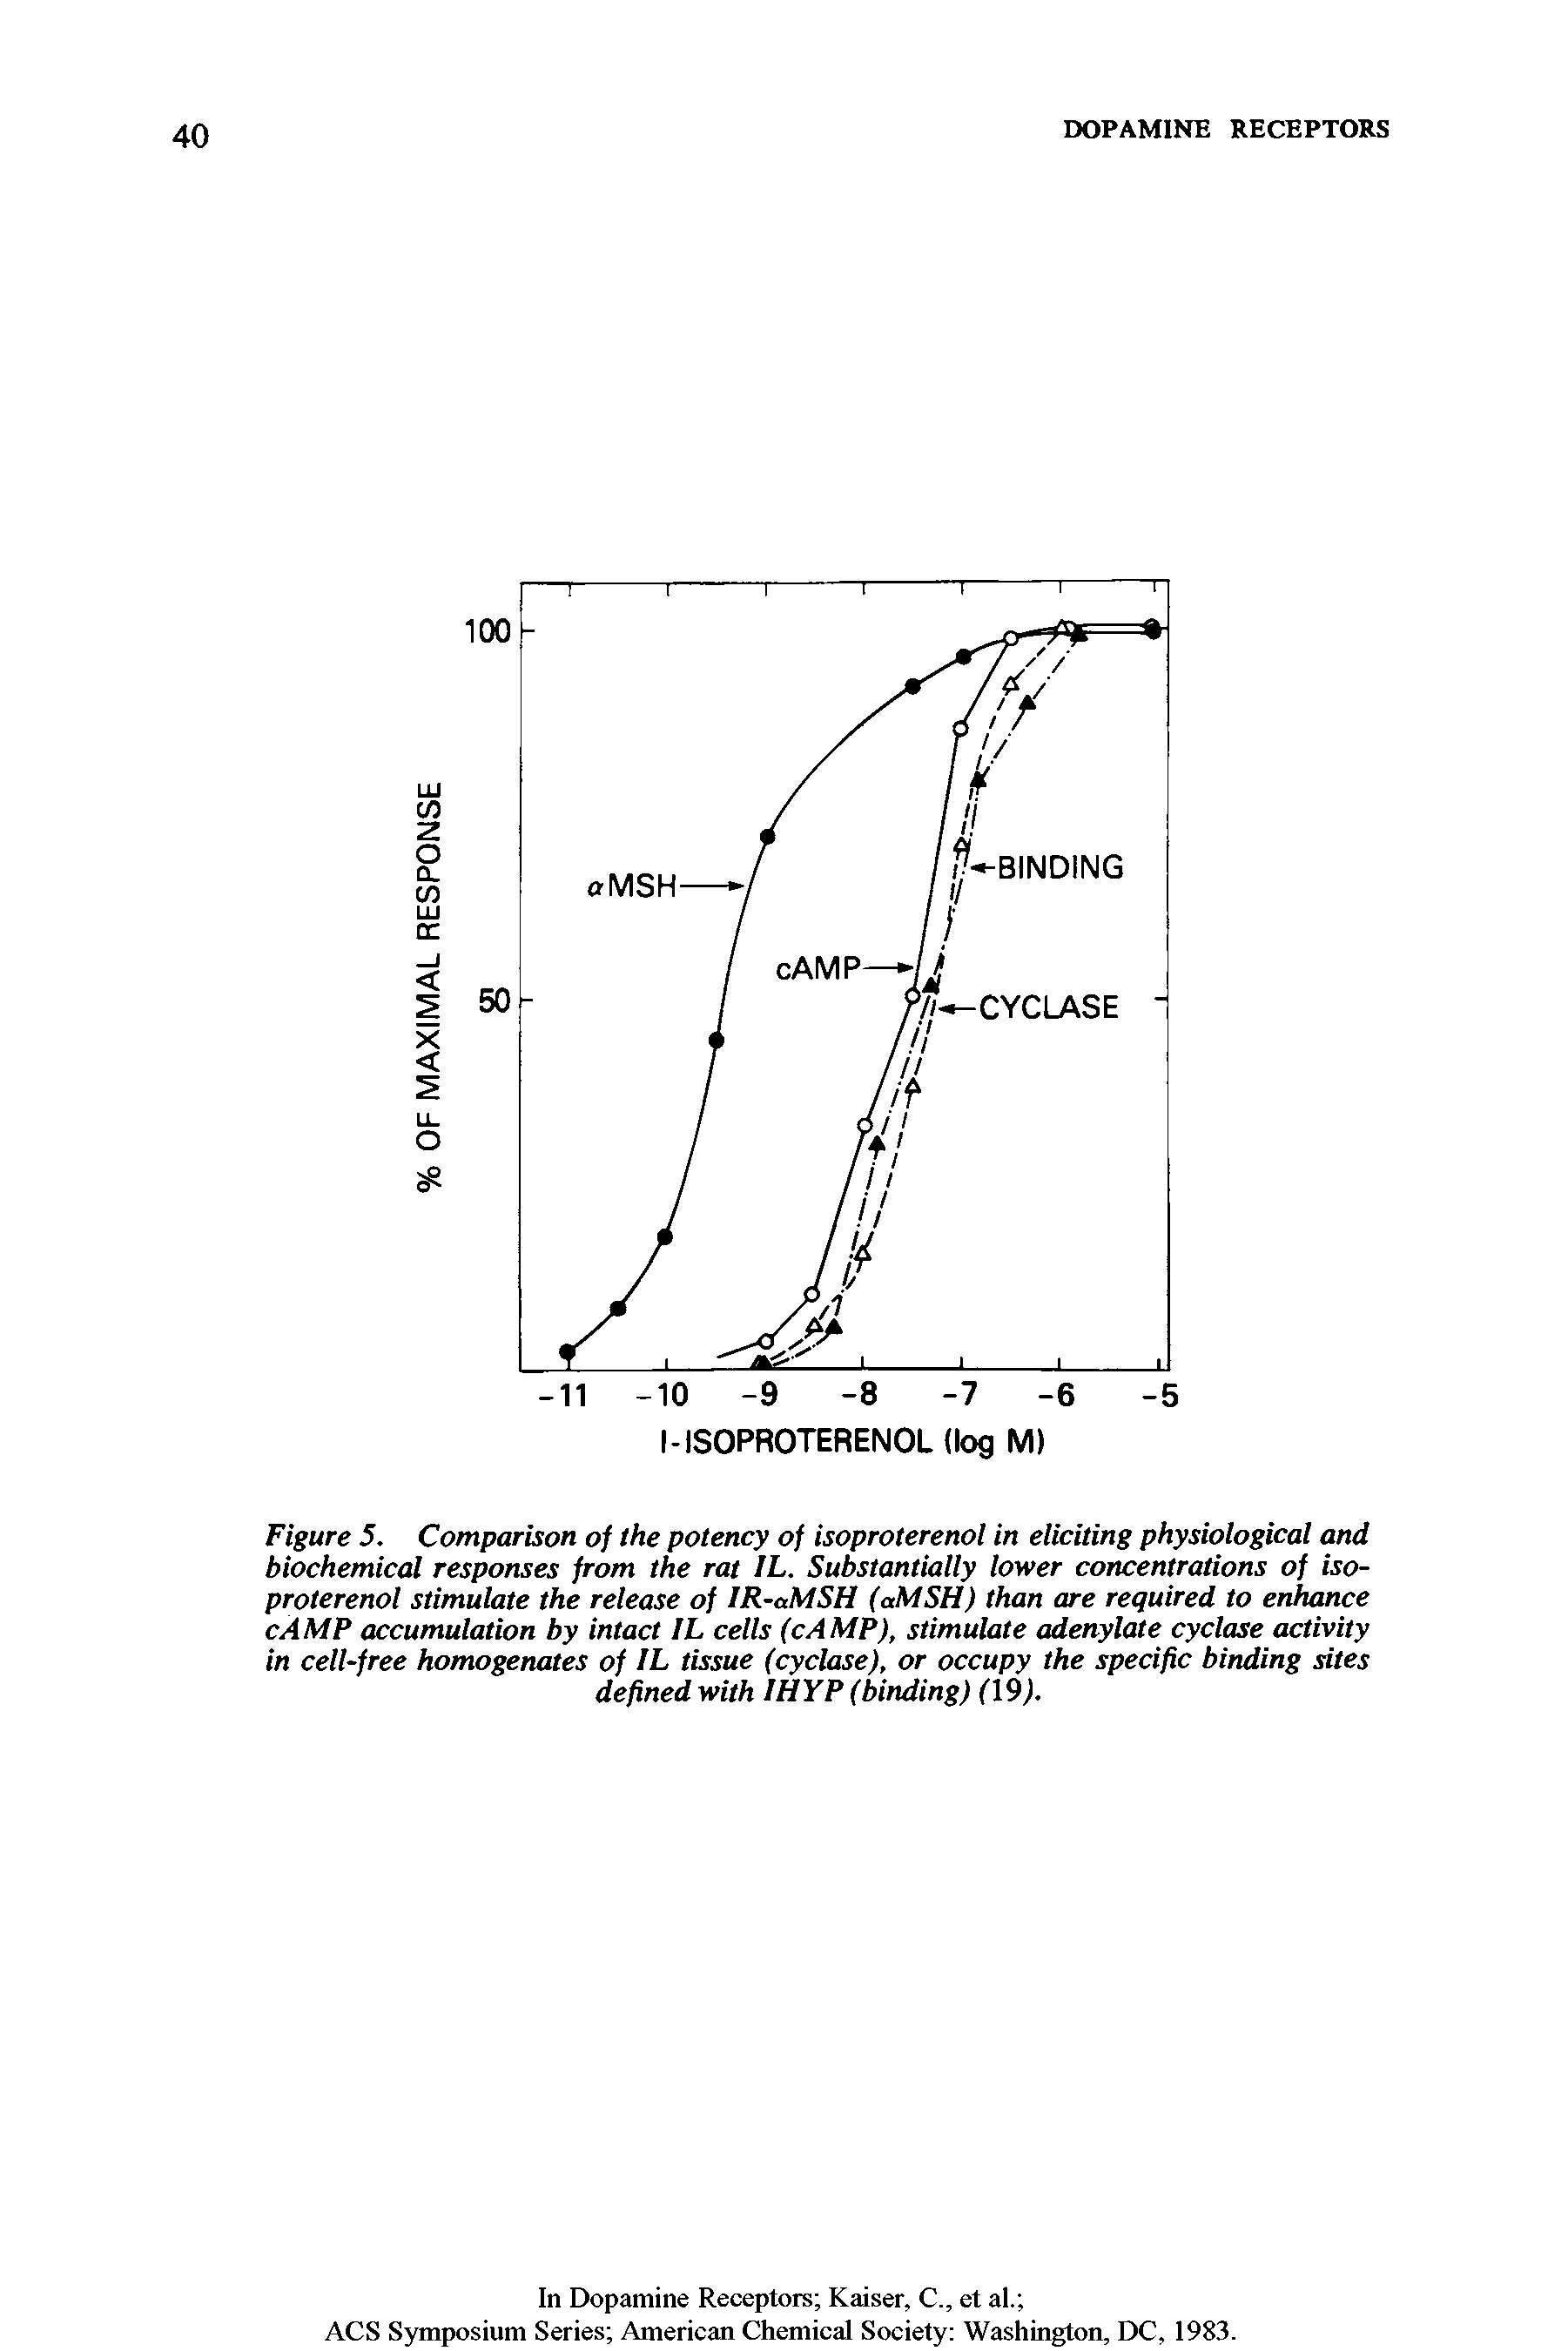 Figure 5. Comparison of the potency of isoproterenol in eliciting physiological and biochemical responses from the rat IL. Substantially lower concentrations of isoproterenol stimulate the release of IR-aMSH (aMSH) than are required to enhance cAMP accumulation by intact IL cells (cAMP), stimulate adenylate cyclase activity in cell-free homogenates of IL tissue (cyclase), or occupy the specific binding sites defined with IHYP (binding) (19).